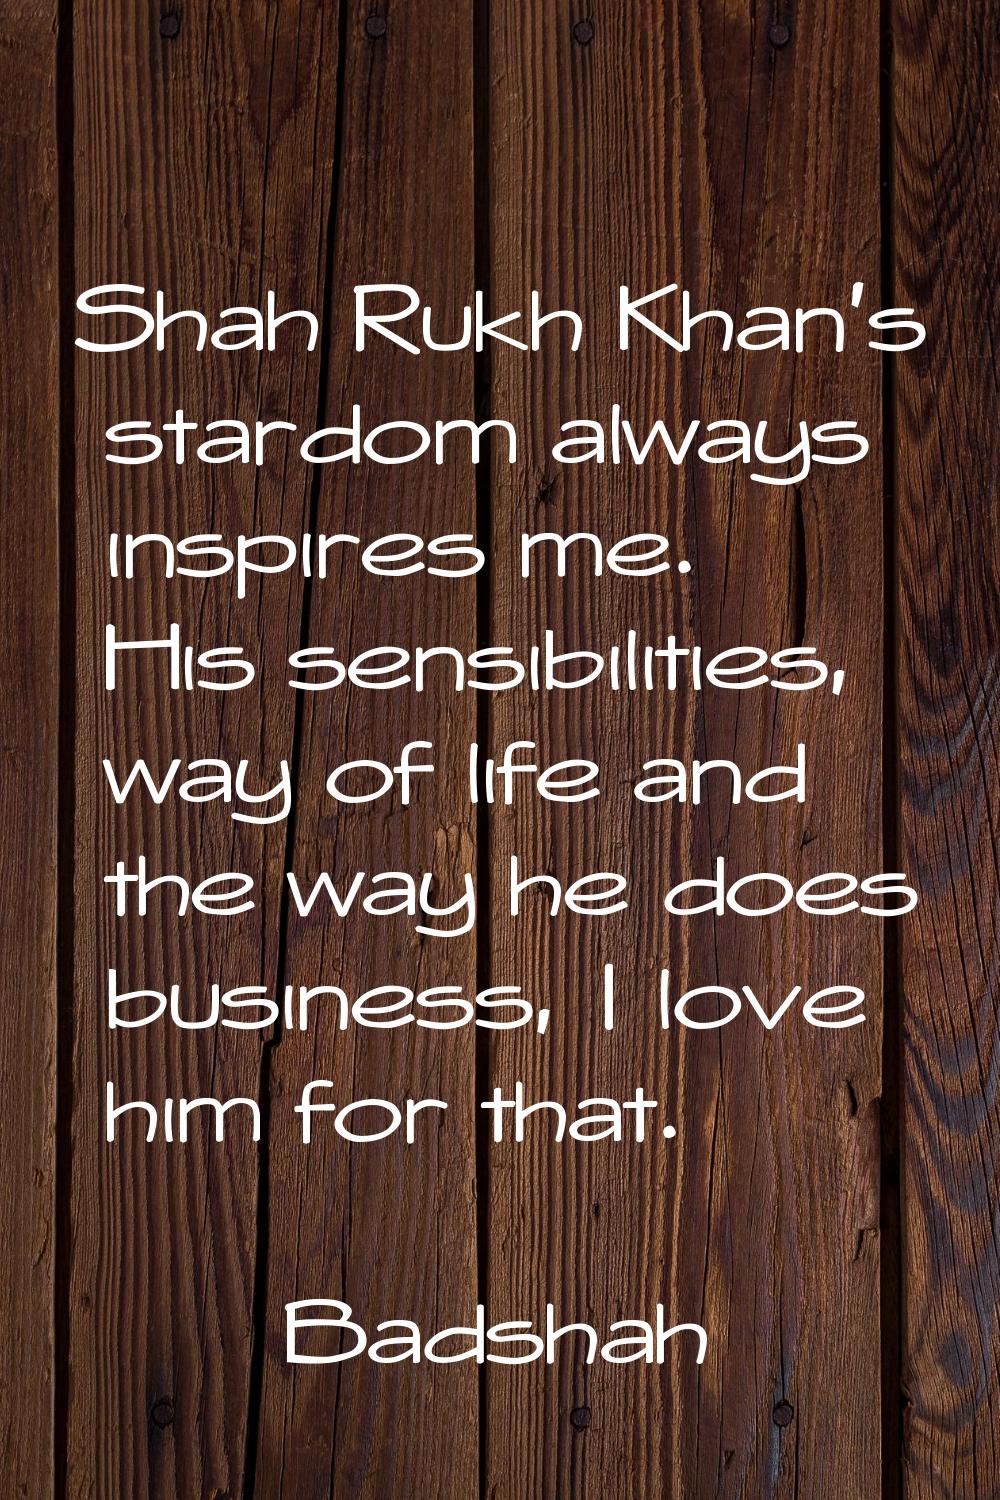 Shah Rukh Khan's stardom always inspires me. His sensibilities, way of life and the way he does bus